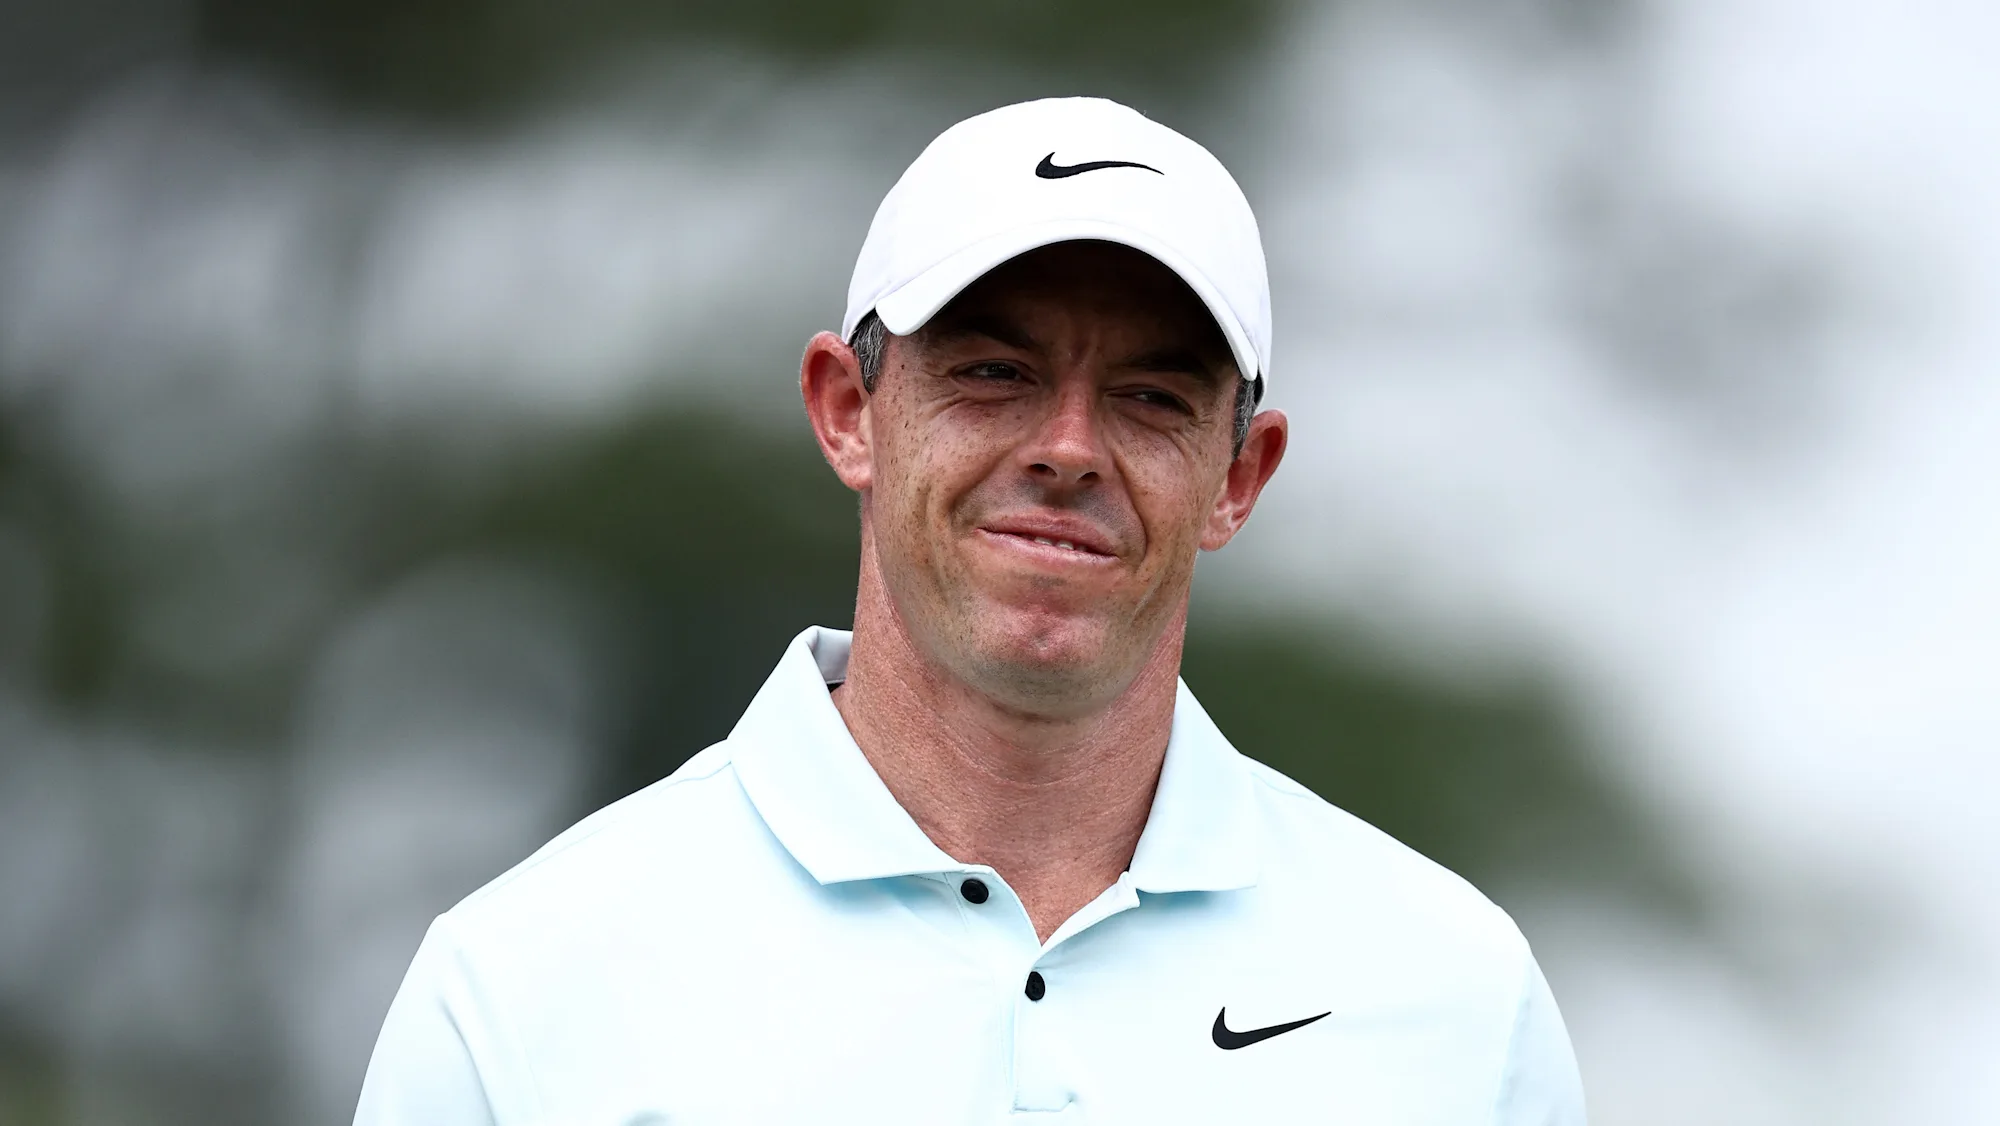 Unfair Or Proper Punishment? Golf Fans Divided Over Rory McIlroy’s Horror Break In Final Round Of US Open